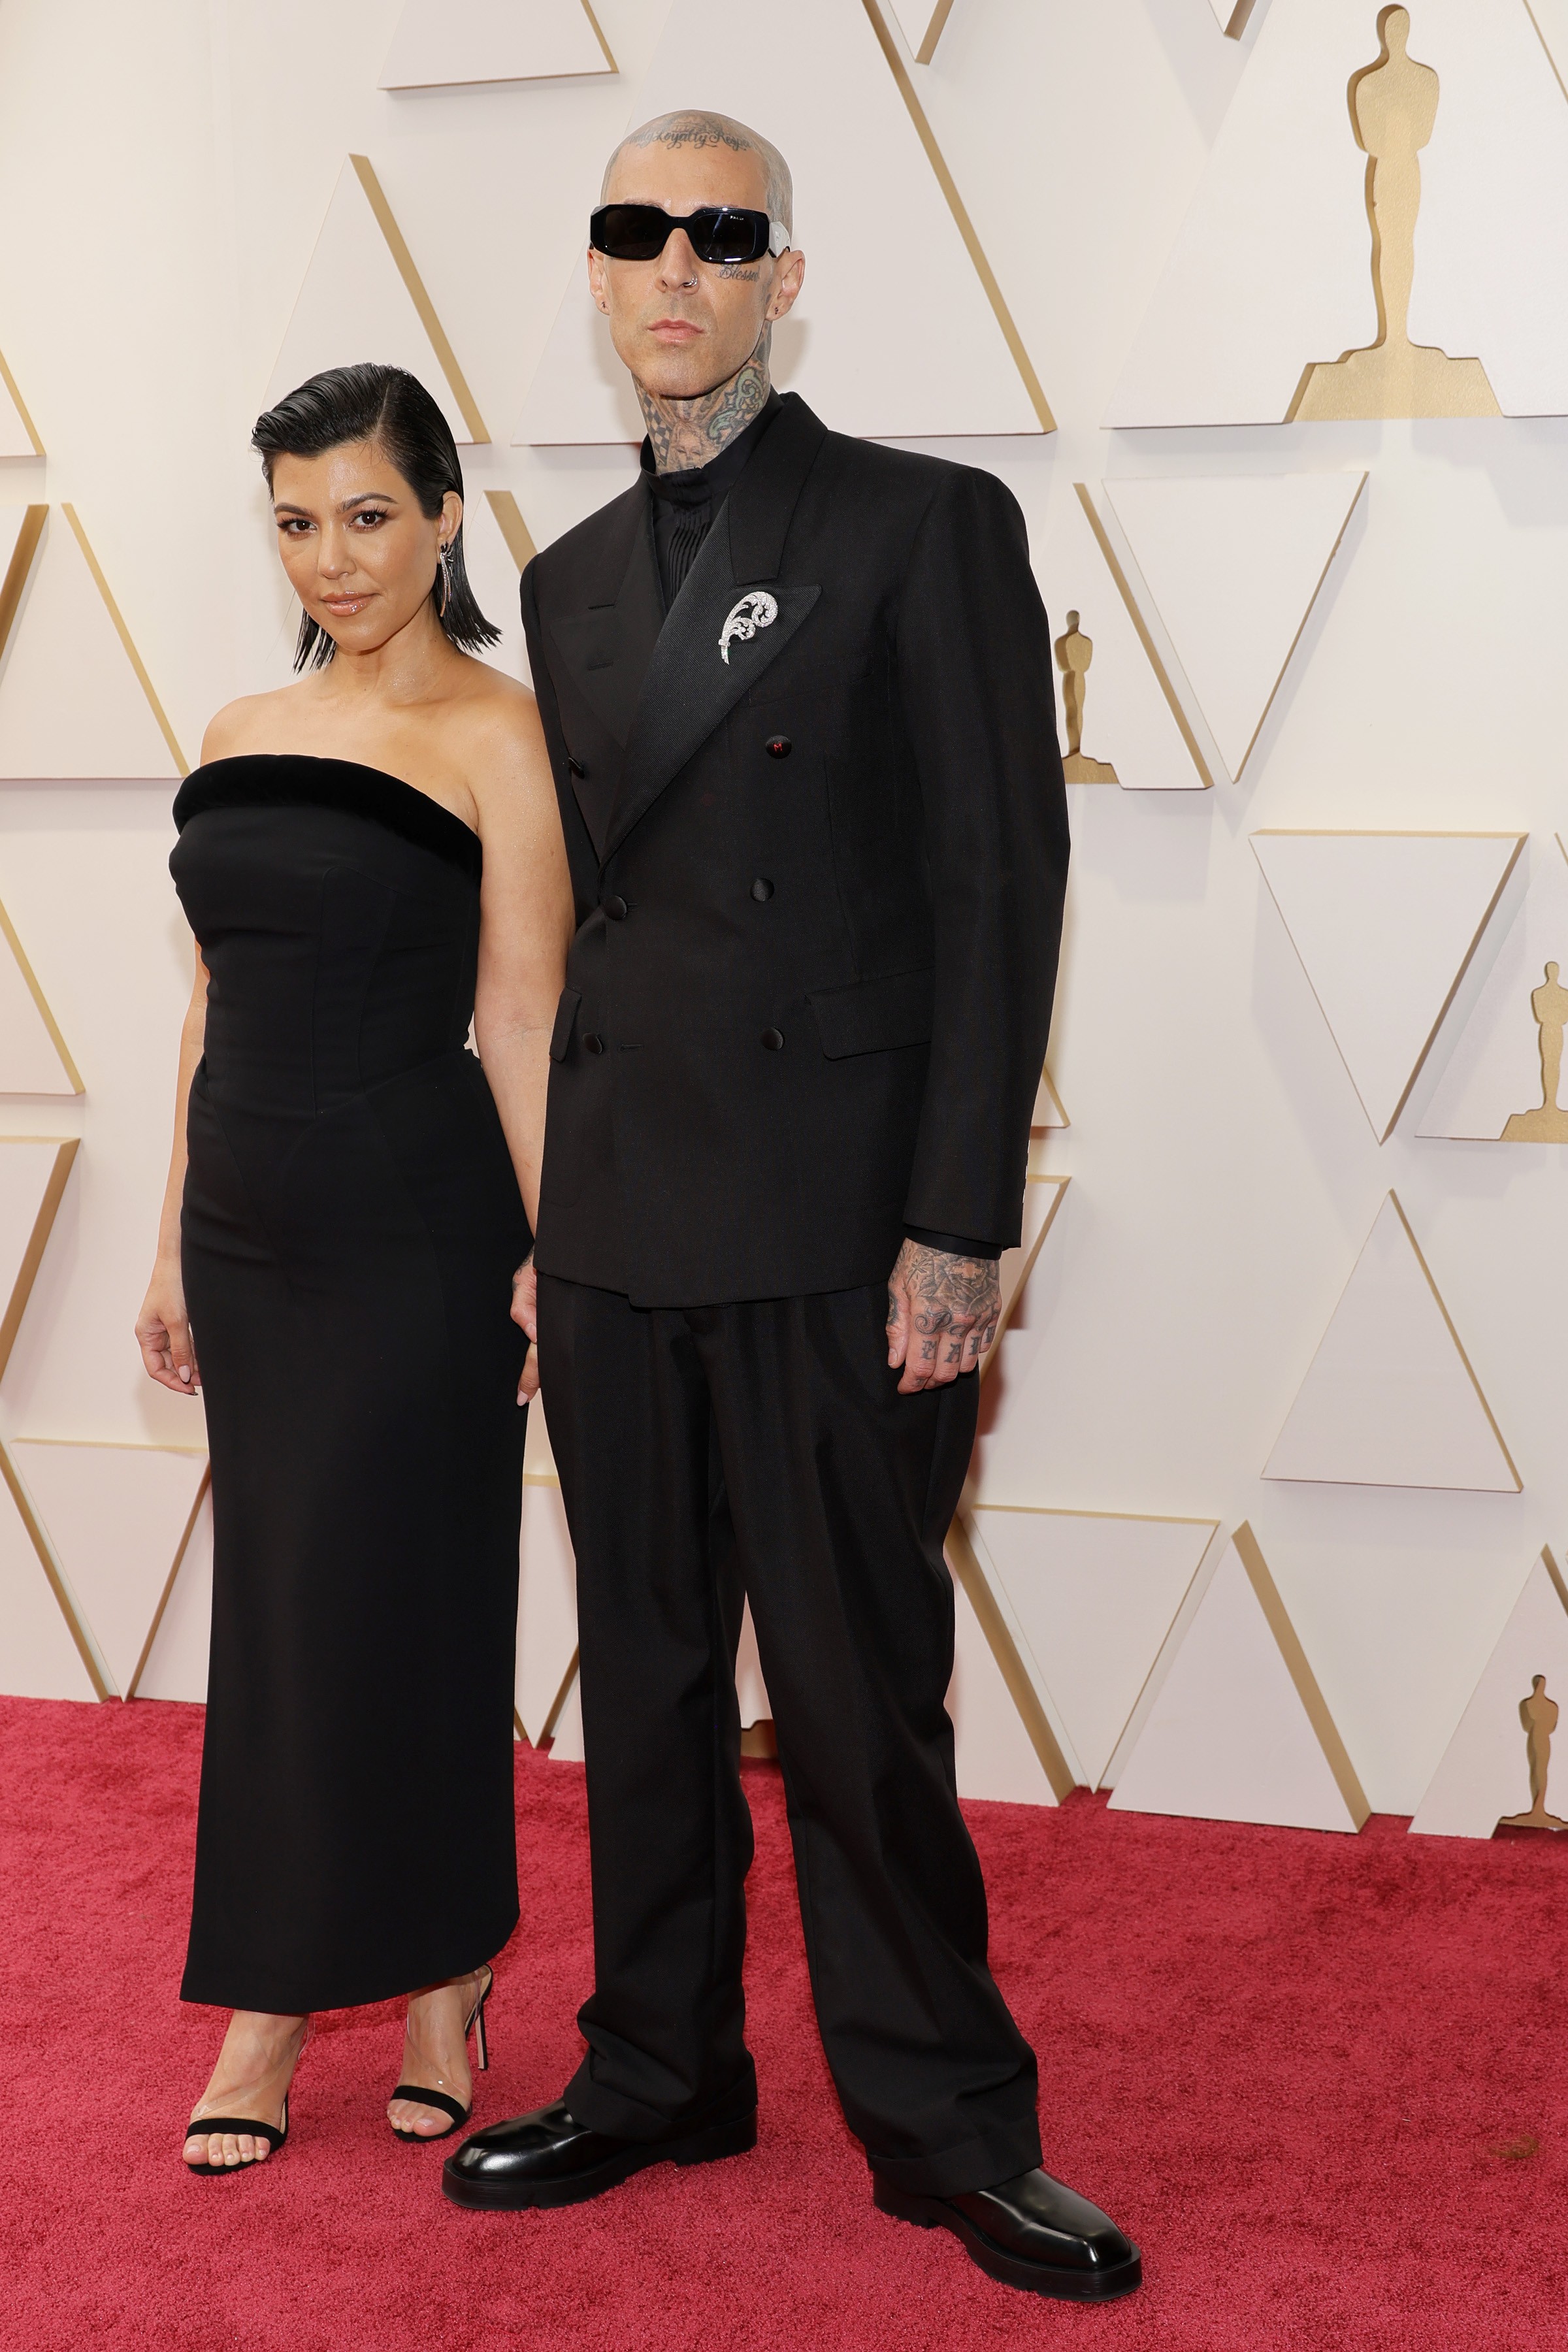 HOLLYWOOD, CALIFORNIA - MARCH 27: (L-R) Kourtney Kardashian and Travis Barker attend the 94th Annual Academy Awards at Hollywood and Highland on March 27, 2022 in Hollywood, California. (Photo by Mike Coppola/Getty Images) (Foto: Getty Images)